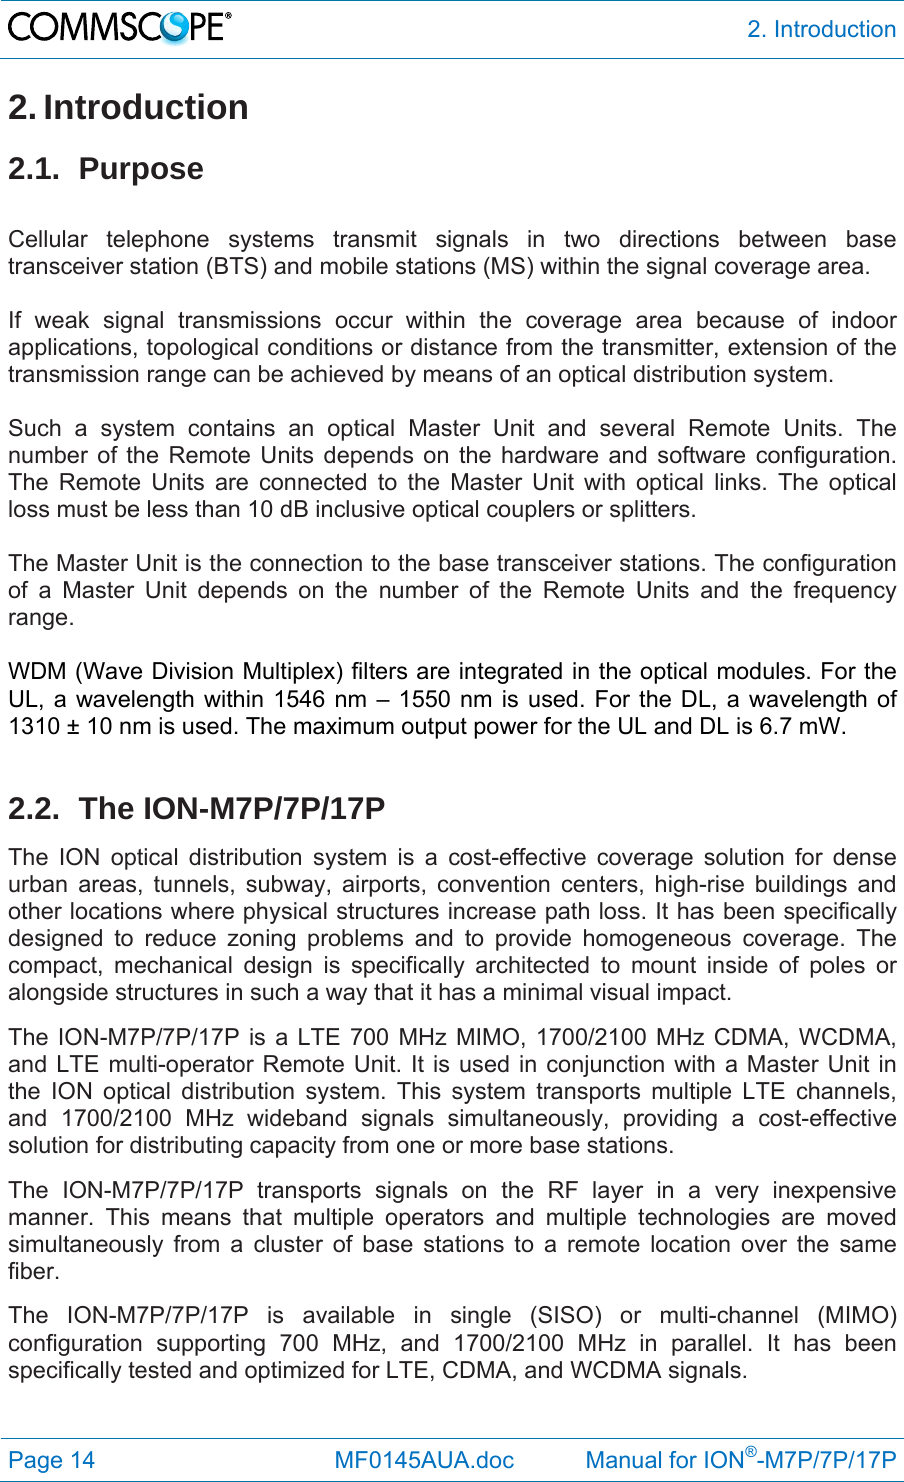  2. Introduction Page 14              MF0145AUA.doc           Manual for ION®-M7P/7P/17P 2. Introduction 2.1. Purpose  Cellular telephone systems transmit signals in two directions between base transceiver station (BTS) and mobile stations (MS) within the signal coverage area.  If weak signal transmissions occur within the coverage area because of indoor applications, topological conditions or distance from the transmitter, extension of the transmission range can be achieved by means of an optical distribution system.  Such a system contains an optical Master Unit and several Remote Units. The number of the Remote Units depends on the hardware and software configuration. The Remote Units are connected to the Master Unit with optical links. The optical loss must be less than 10 dB inclusive optical couplers or splitters.  The Master Unit is the connection to the base transceiver stations. The configuration of a Master Unit depends on the number of the Remote Units and the frequency range.   WDM (Wave Division Multiplex) filters are integrated in the optical modules. For the UL, a wavelength within 1546 nm – 1550 nm is used. For the DL, a wavelength of 1310 ± 10 nm is used. The maximum output power for the UL and DL is 6.7 mW.  2.2. The ION-M7P/7P/17P The ION optical distribution system is a cost-effective coverage solution for dense urban areas, tunnels, subway, airports, convention centers, high-rise buildings and other locations where physical structures increase path loss. It has been specifically designed to reduce zoning problems and to provide homogeneous coverage. The compact, mechanical design is specifically architected to mount inside of poles or alongside structures in such a way that it has a minimal visual impact. The ION-M7P/7P/17P is a LTE 700 MHz MIMO, 1700/2100 MHz CDMA, WCDMA, and LTE multi-operator Remote Unit. It is used in conjunction with a Master Unit in the ION optical distribution system. This system transports multiple LTE channels, and 1700/2100 MHz wideband signals simultaneously, providing a cost-effective solution for distributing capacity from one or more base stations. The ION-M7P/7P/17P transports signals on the RF layer in a very inexpensive manner. This means that multiple operators and multiple technologies are moved simultaneously from a cluster of base stations to a remote location over the same fiber.  The ION-M7P/7P/17P is available in single (SISO) or multi-channel (MIMO) configuration supporting 700 MHz, and 1700/2100 MHz in parallel. It has been specifically tested and optimized for LTE, CDMA, and WCDMA signals. 